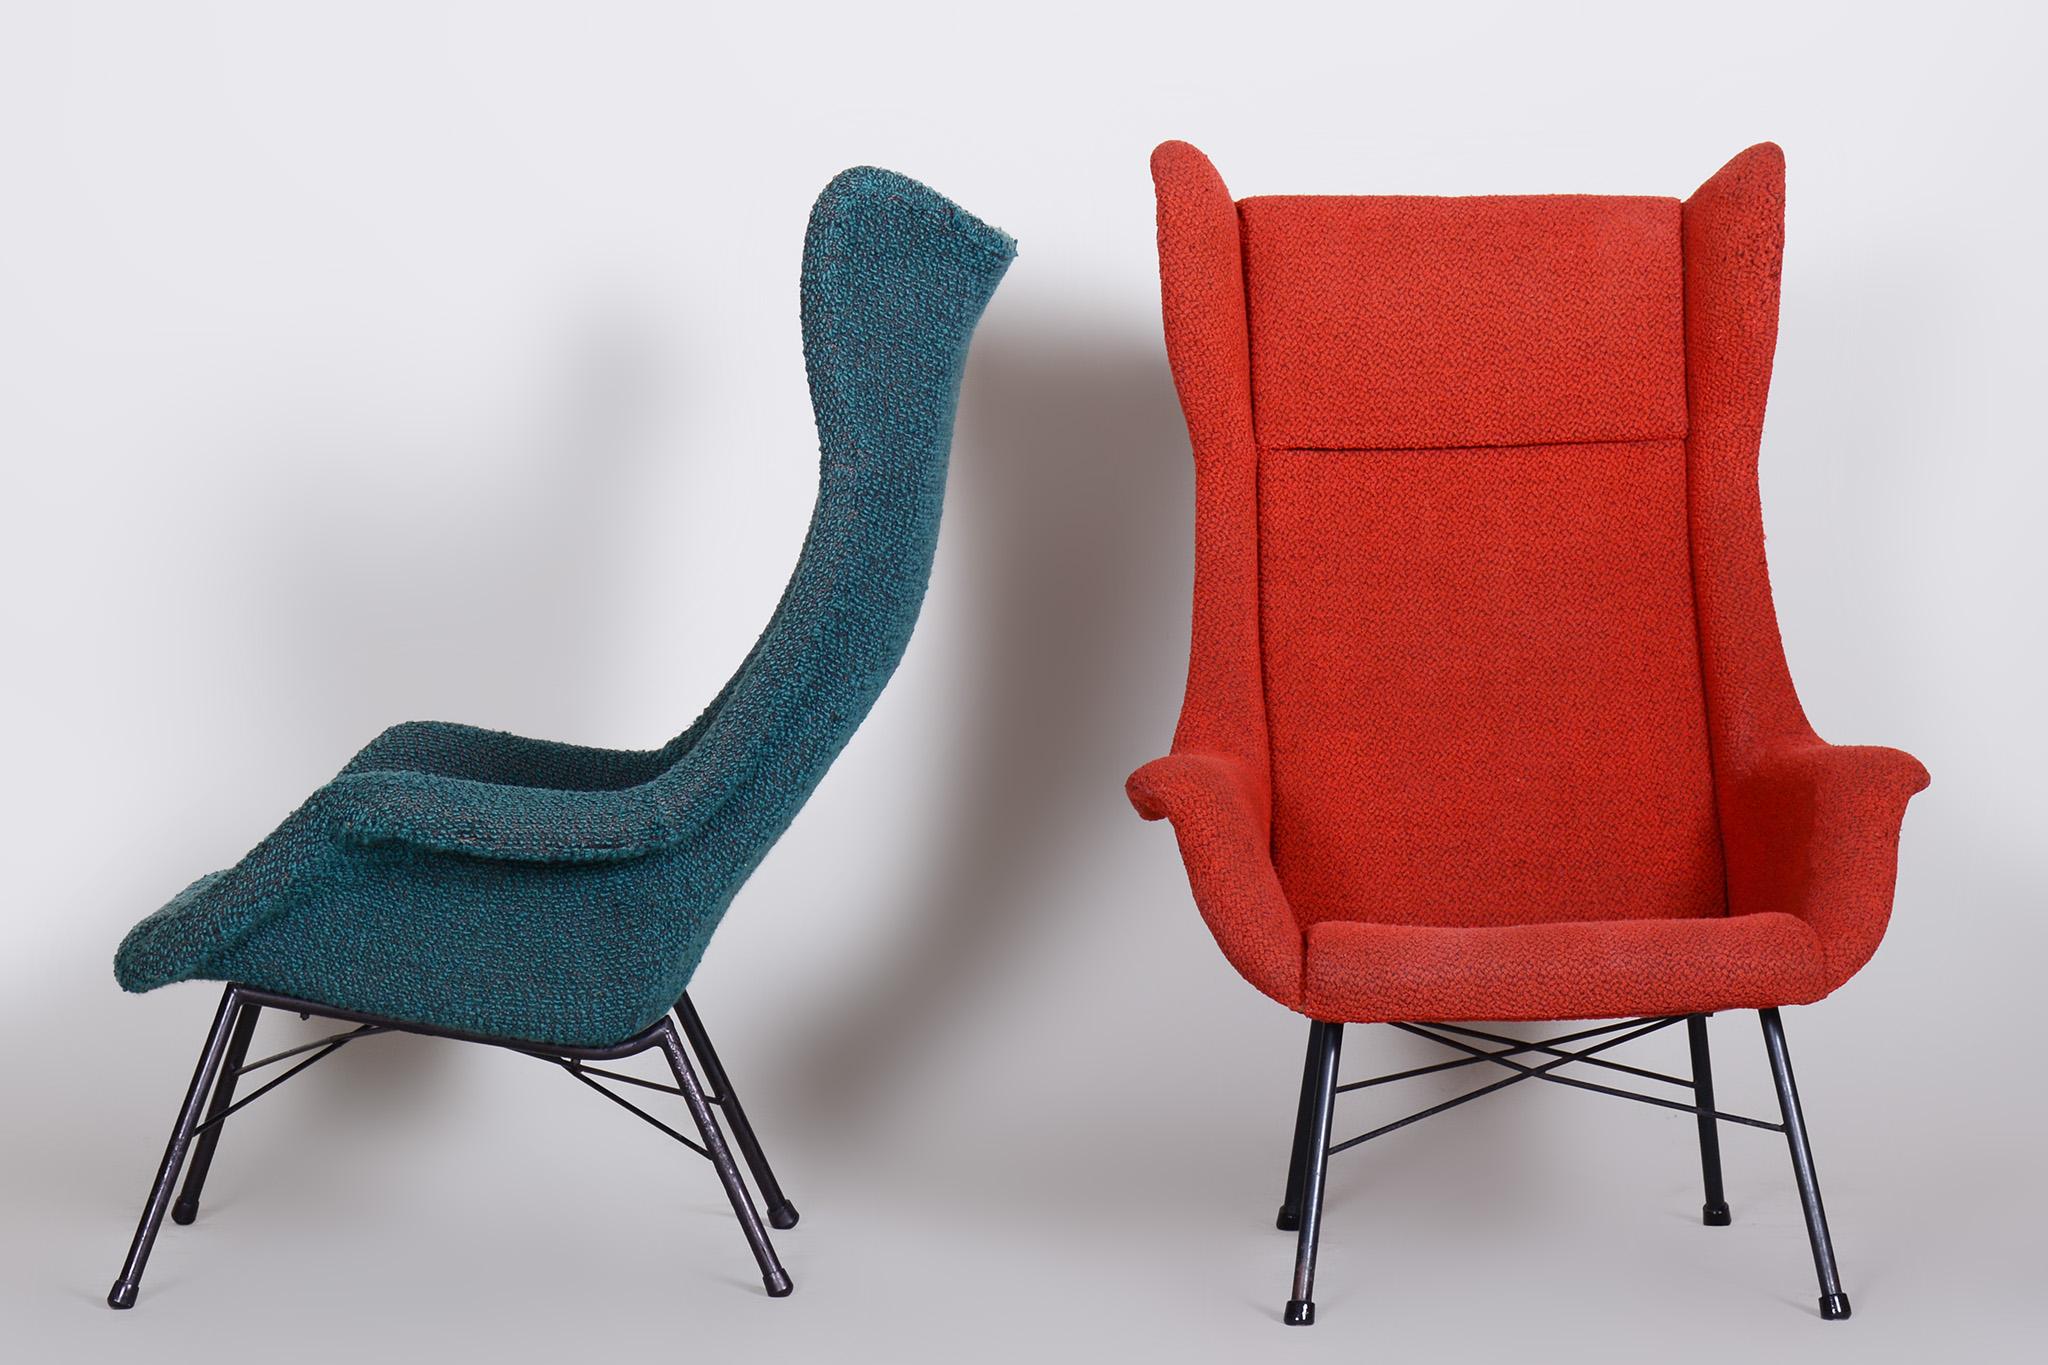 Blue and Red Mid century modern armchairs, made in 1950s Czechia.

Original well preserved condition.
Stable tubular construction.
Professionally cleaned original fabric.

Made by Miroslav Navratil